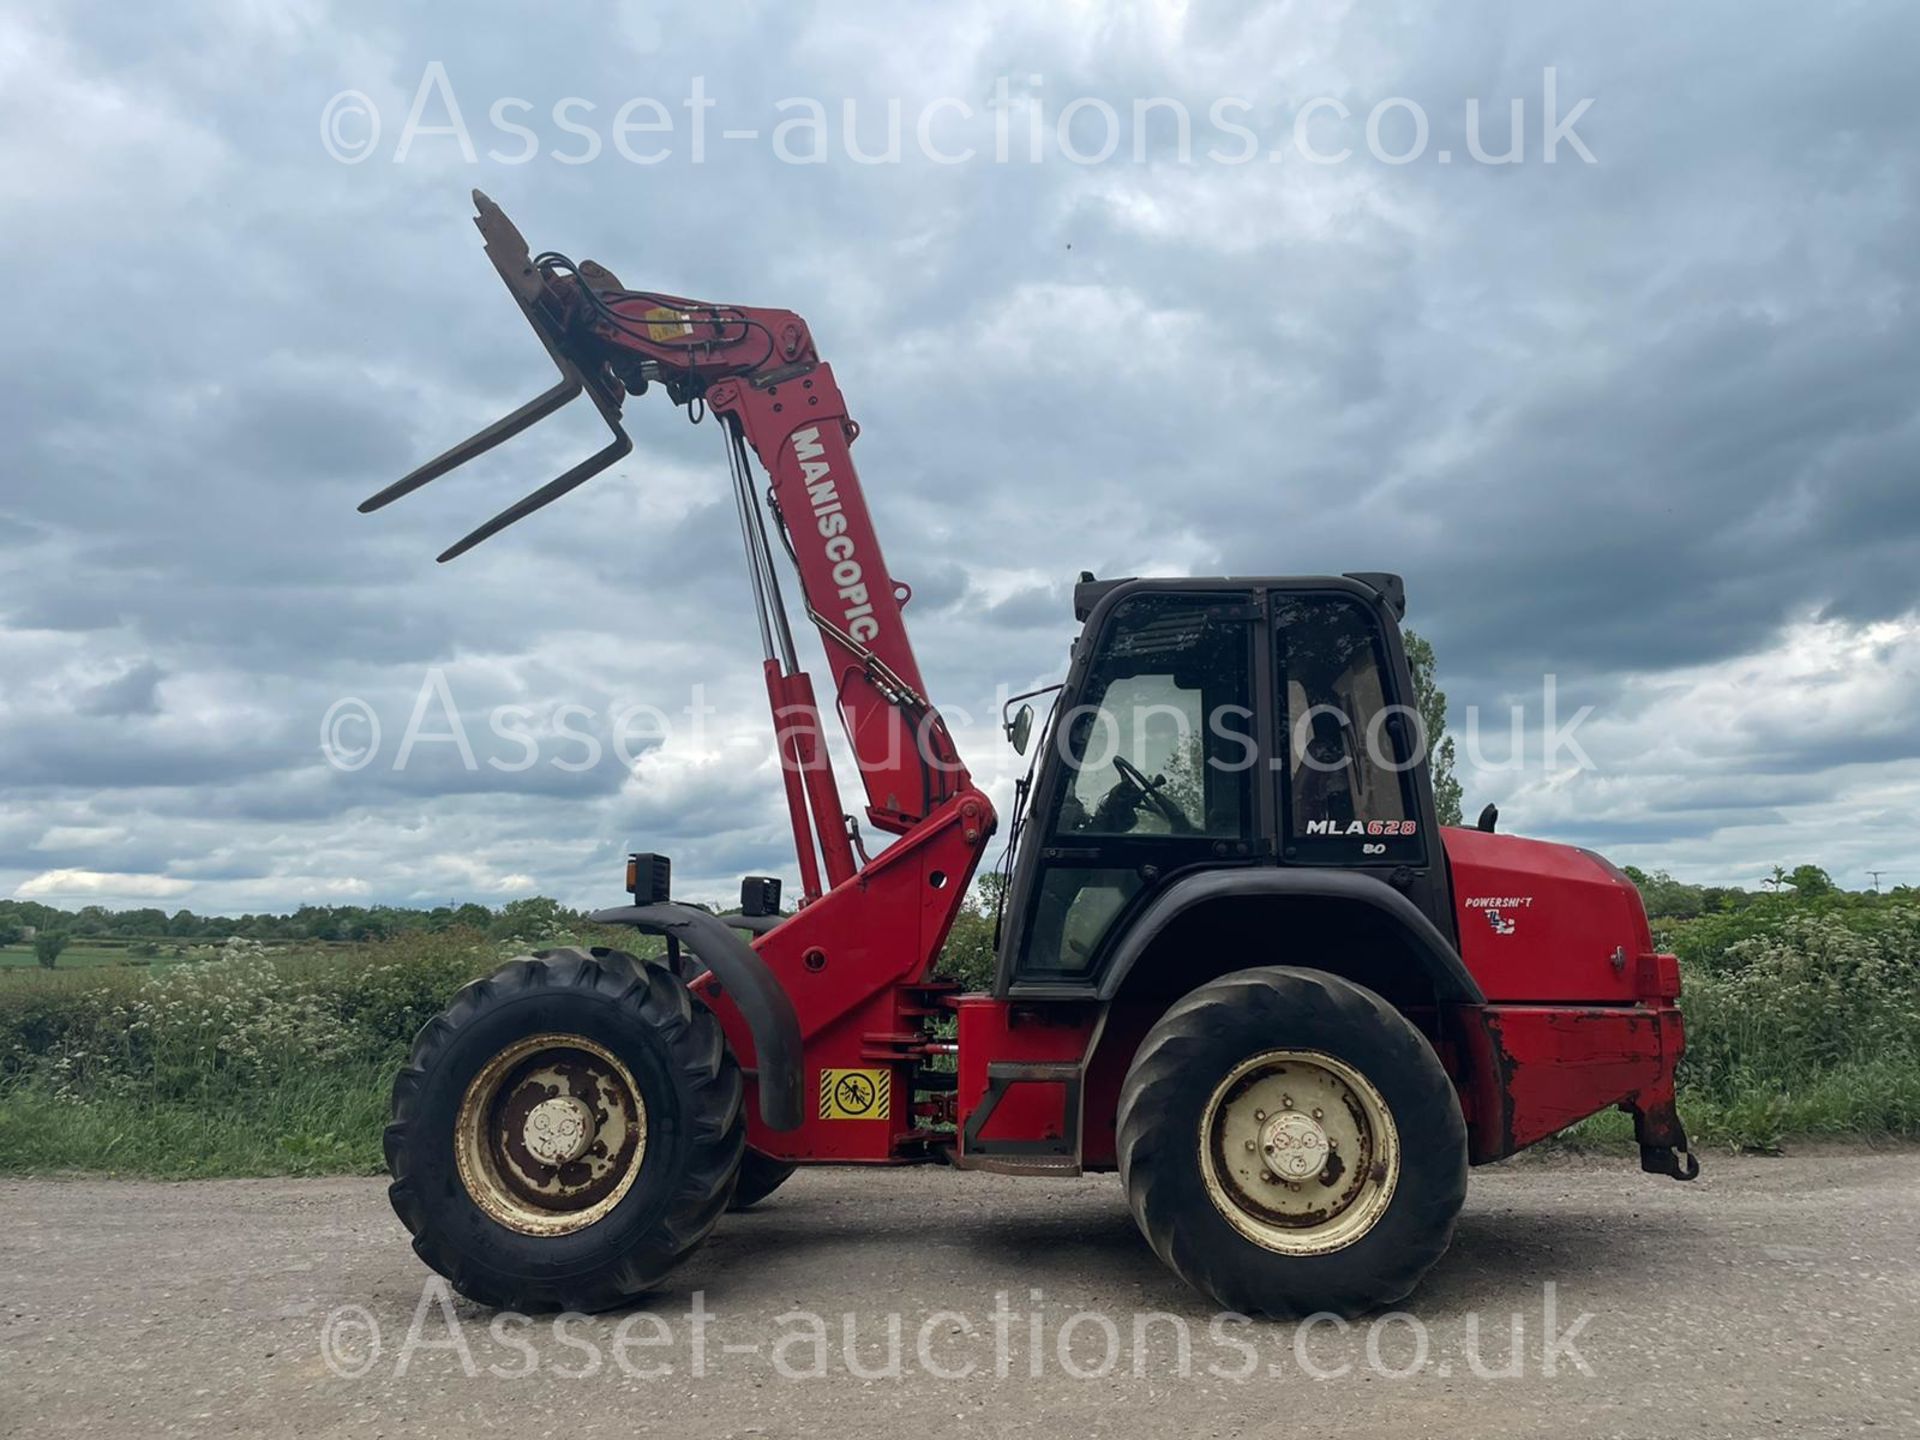 2000 MANITOU MLA 628 ARTICULATED TELESCOPIC TELEHANDLER, RUNS DRIVES AND LIFTS *PLUS VAT* - Image 3 of 26